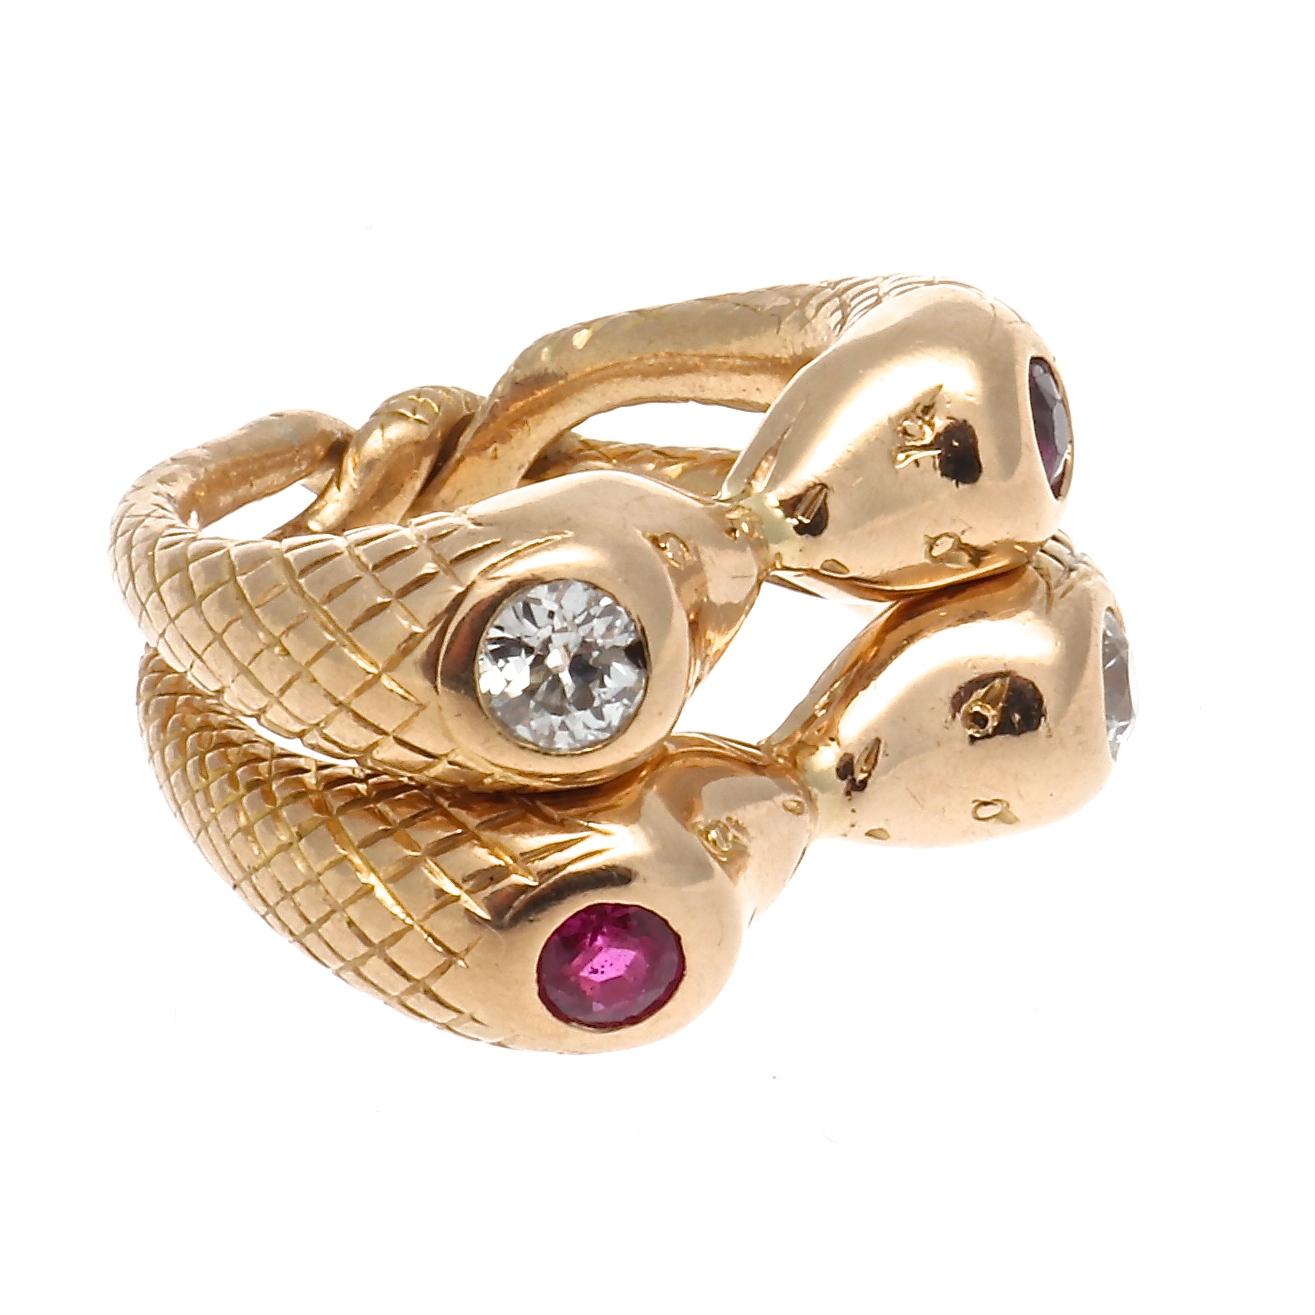 The serpent is one of the oldest mythological symbols representing wisdom, life and eternity. The snake motif has adorned jewelry for centuries and takes on infinite forms. Featuring combined gem encrusted heads of diamonds and rubies lovingly